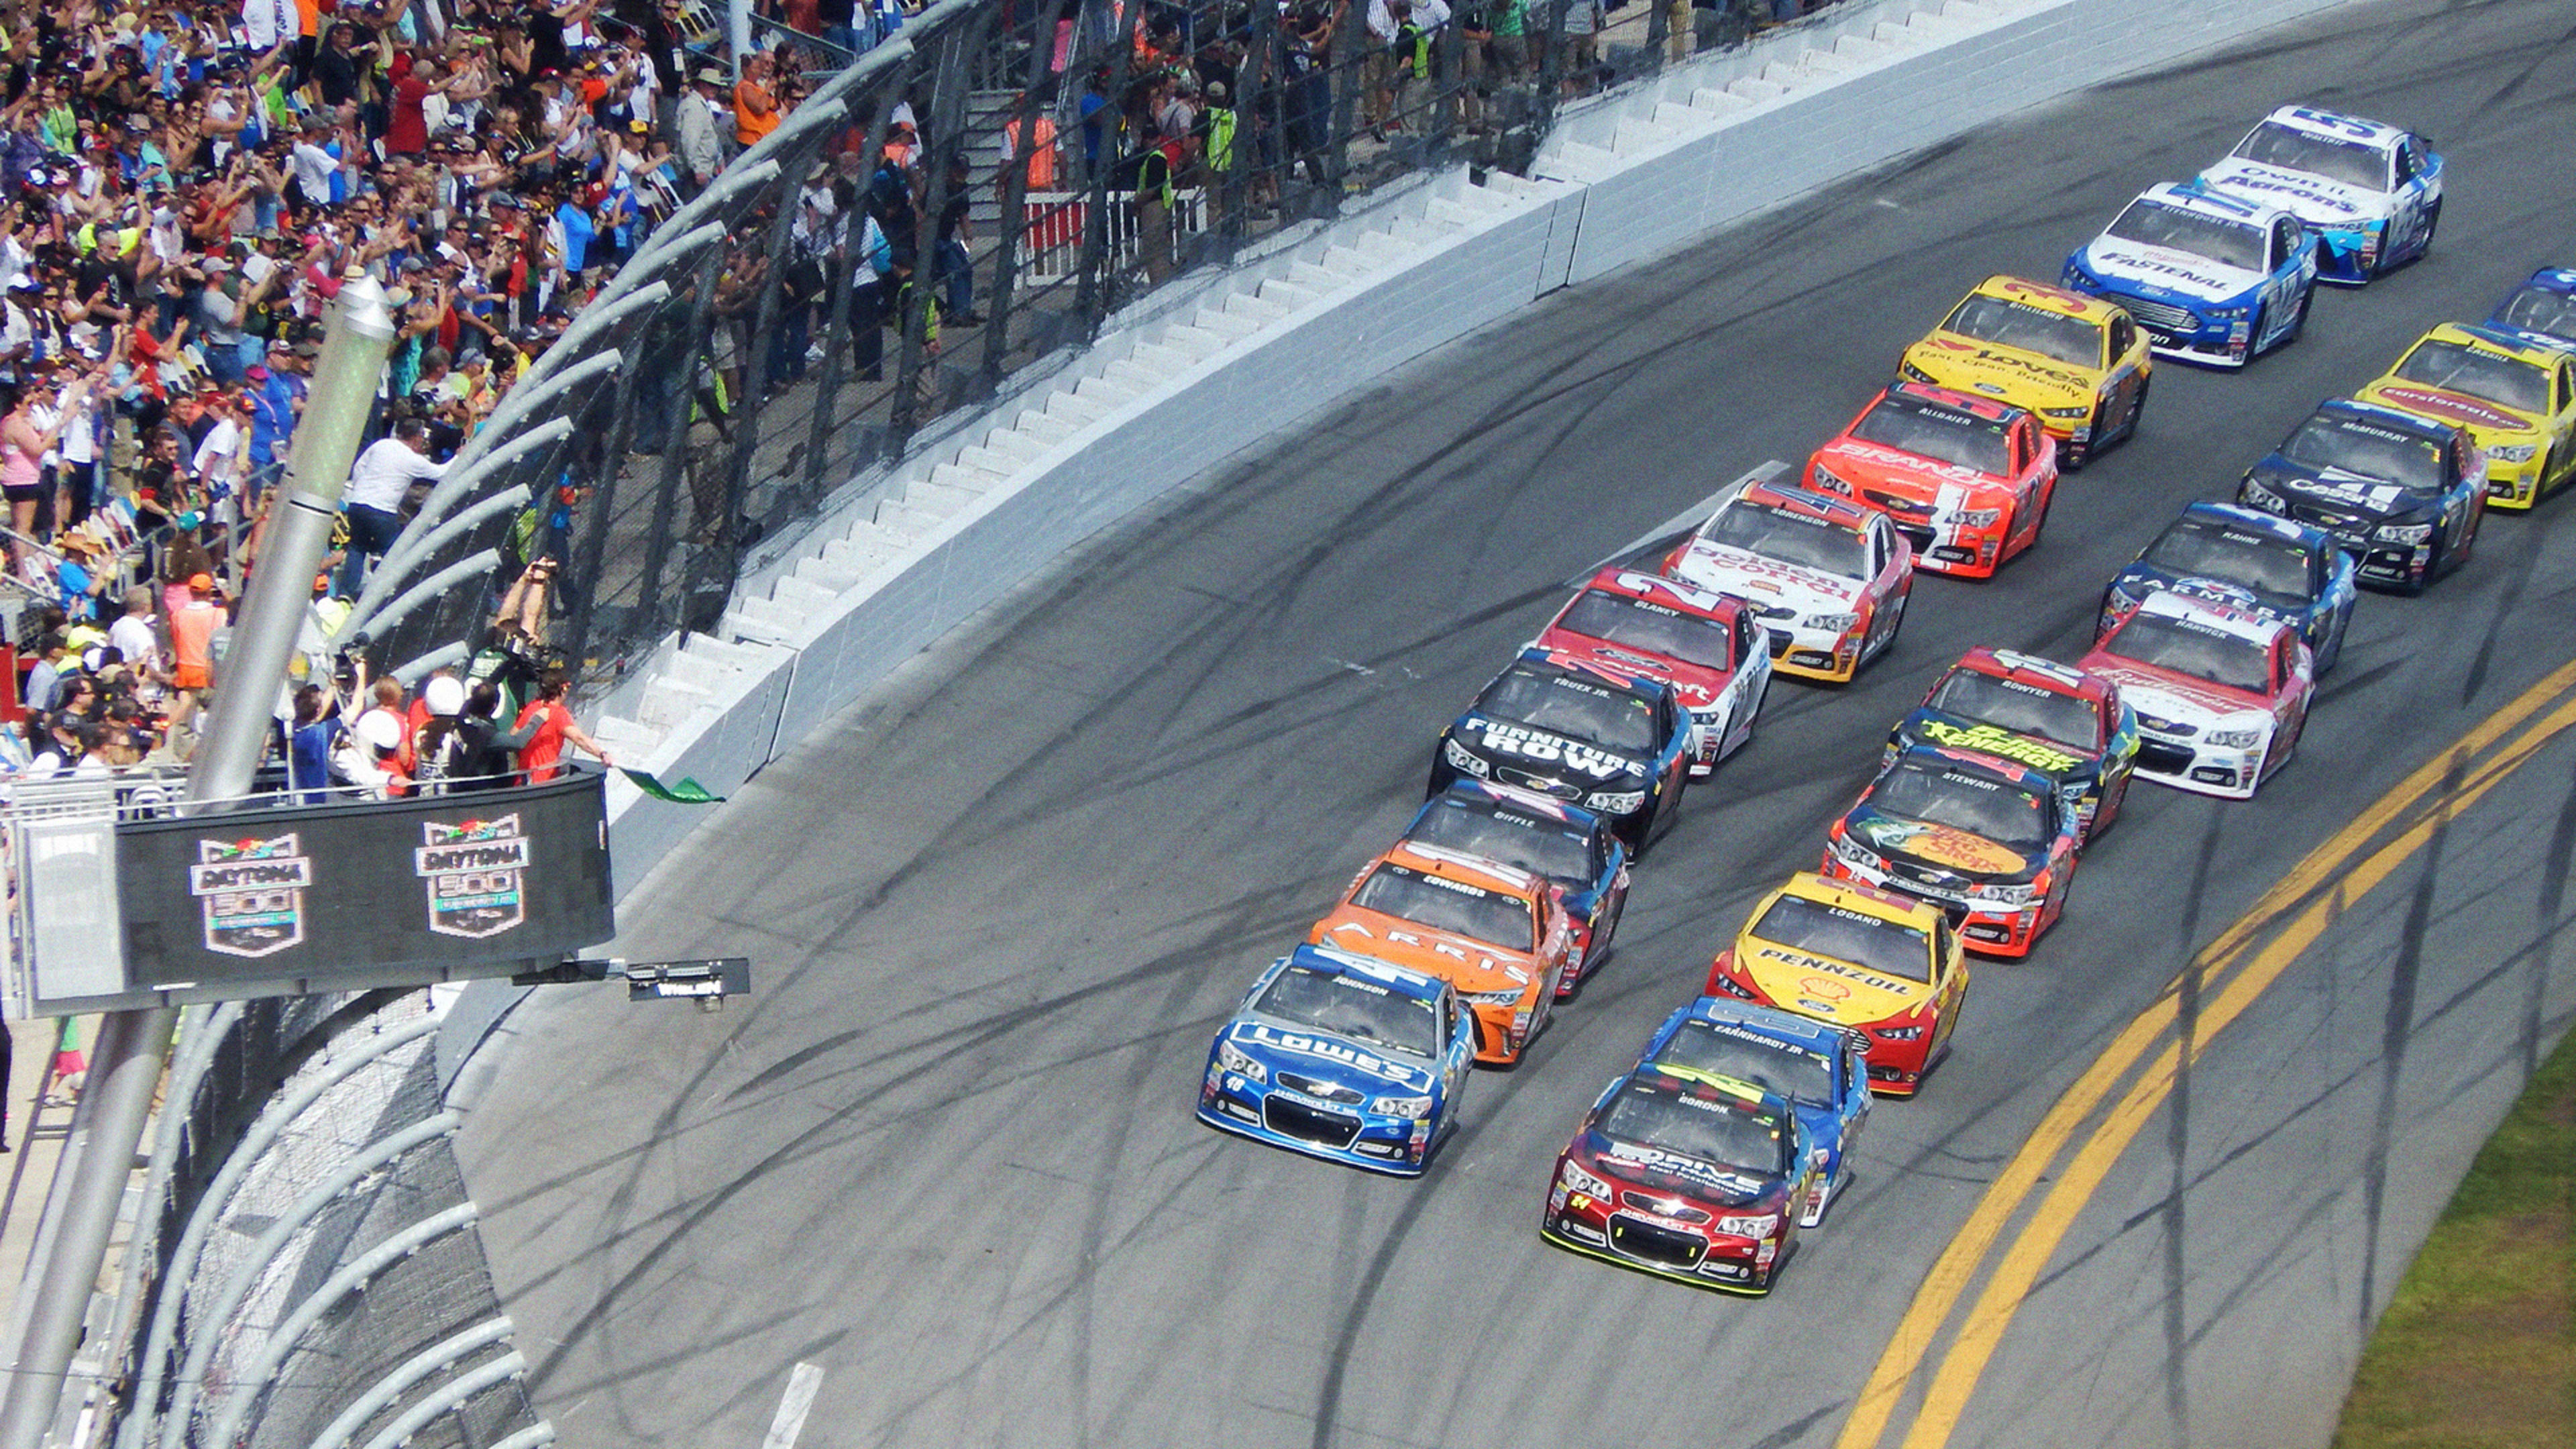 How to watch the 2020 Daytona 500 race live on Fox without cable